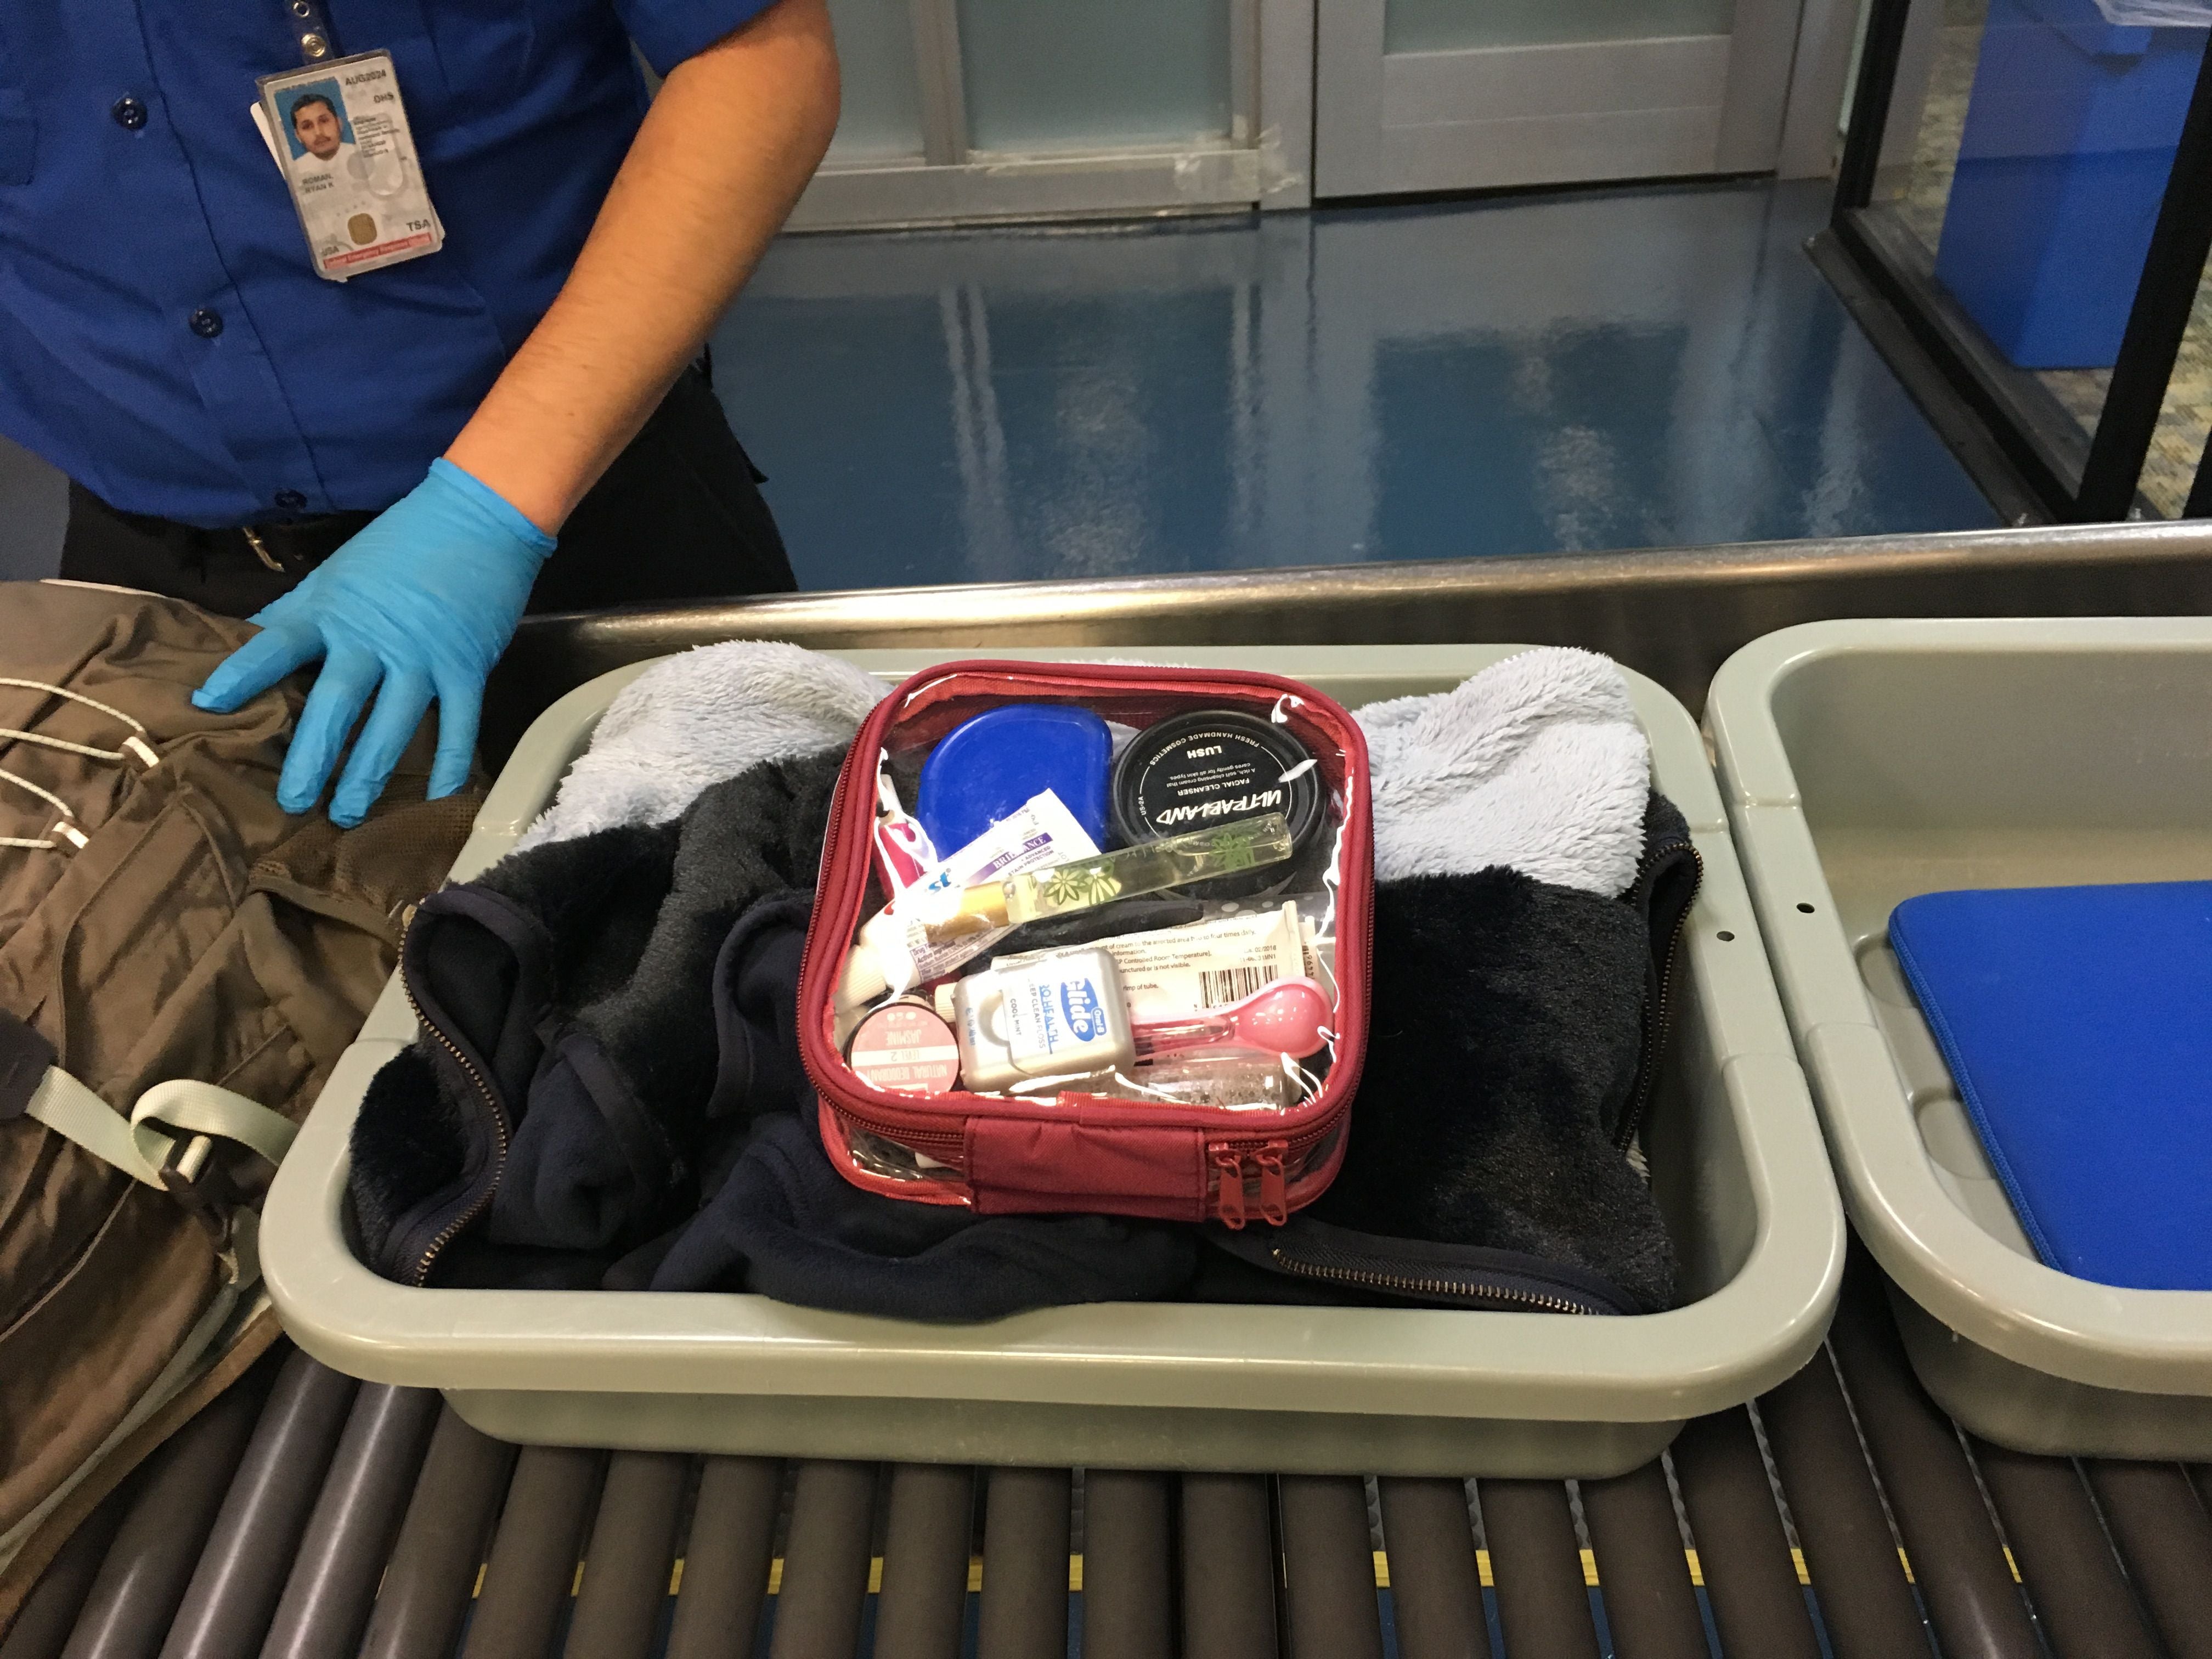 Travel items and small packing cube on a tray passing through airport security